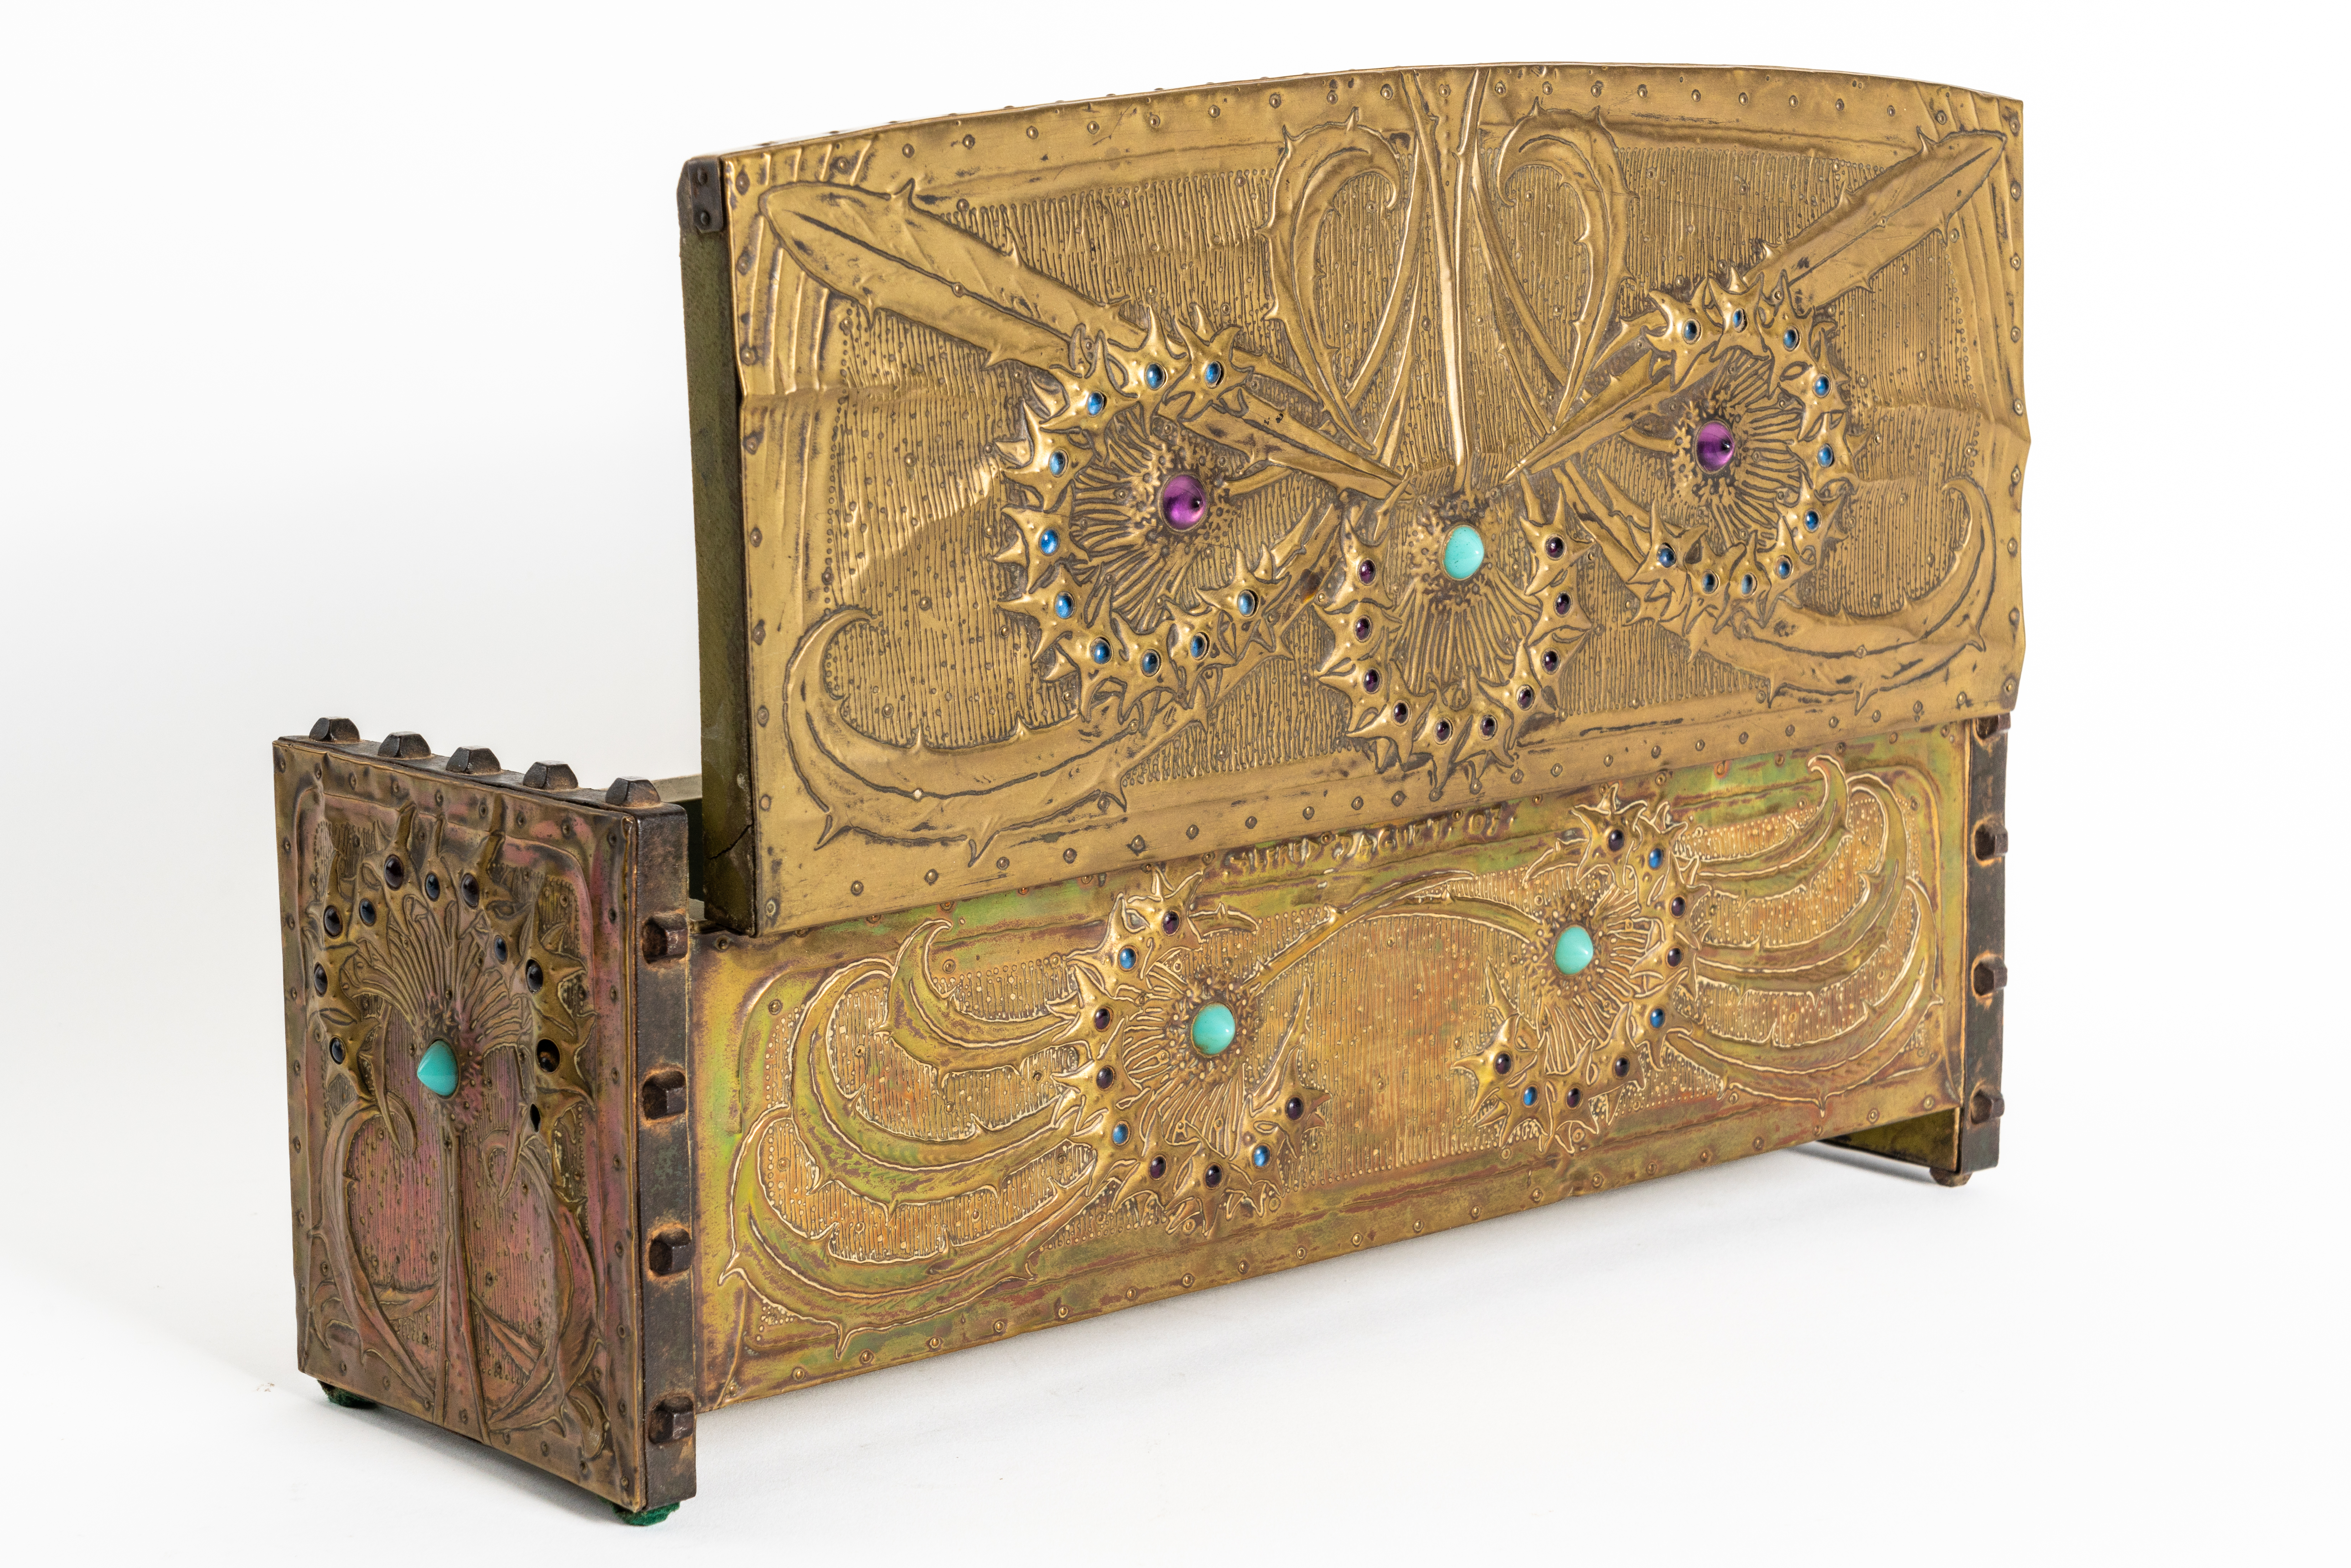 ALFRED DAGUET (1875-1942): A FRENCH ART NOUVEAU EMBOSSED GILT COPPER AND GLASS MOUNTED CASKET... - Image 6 of 8